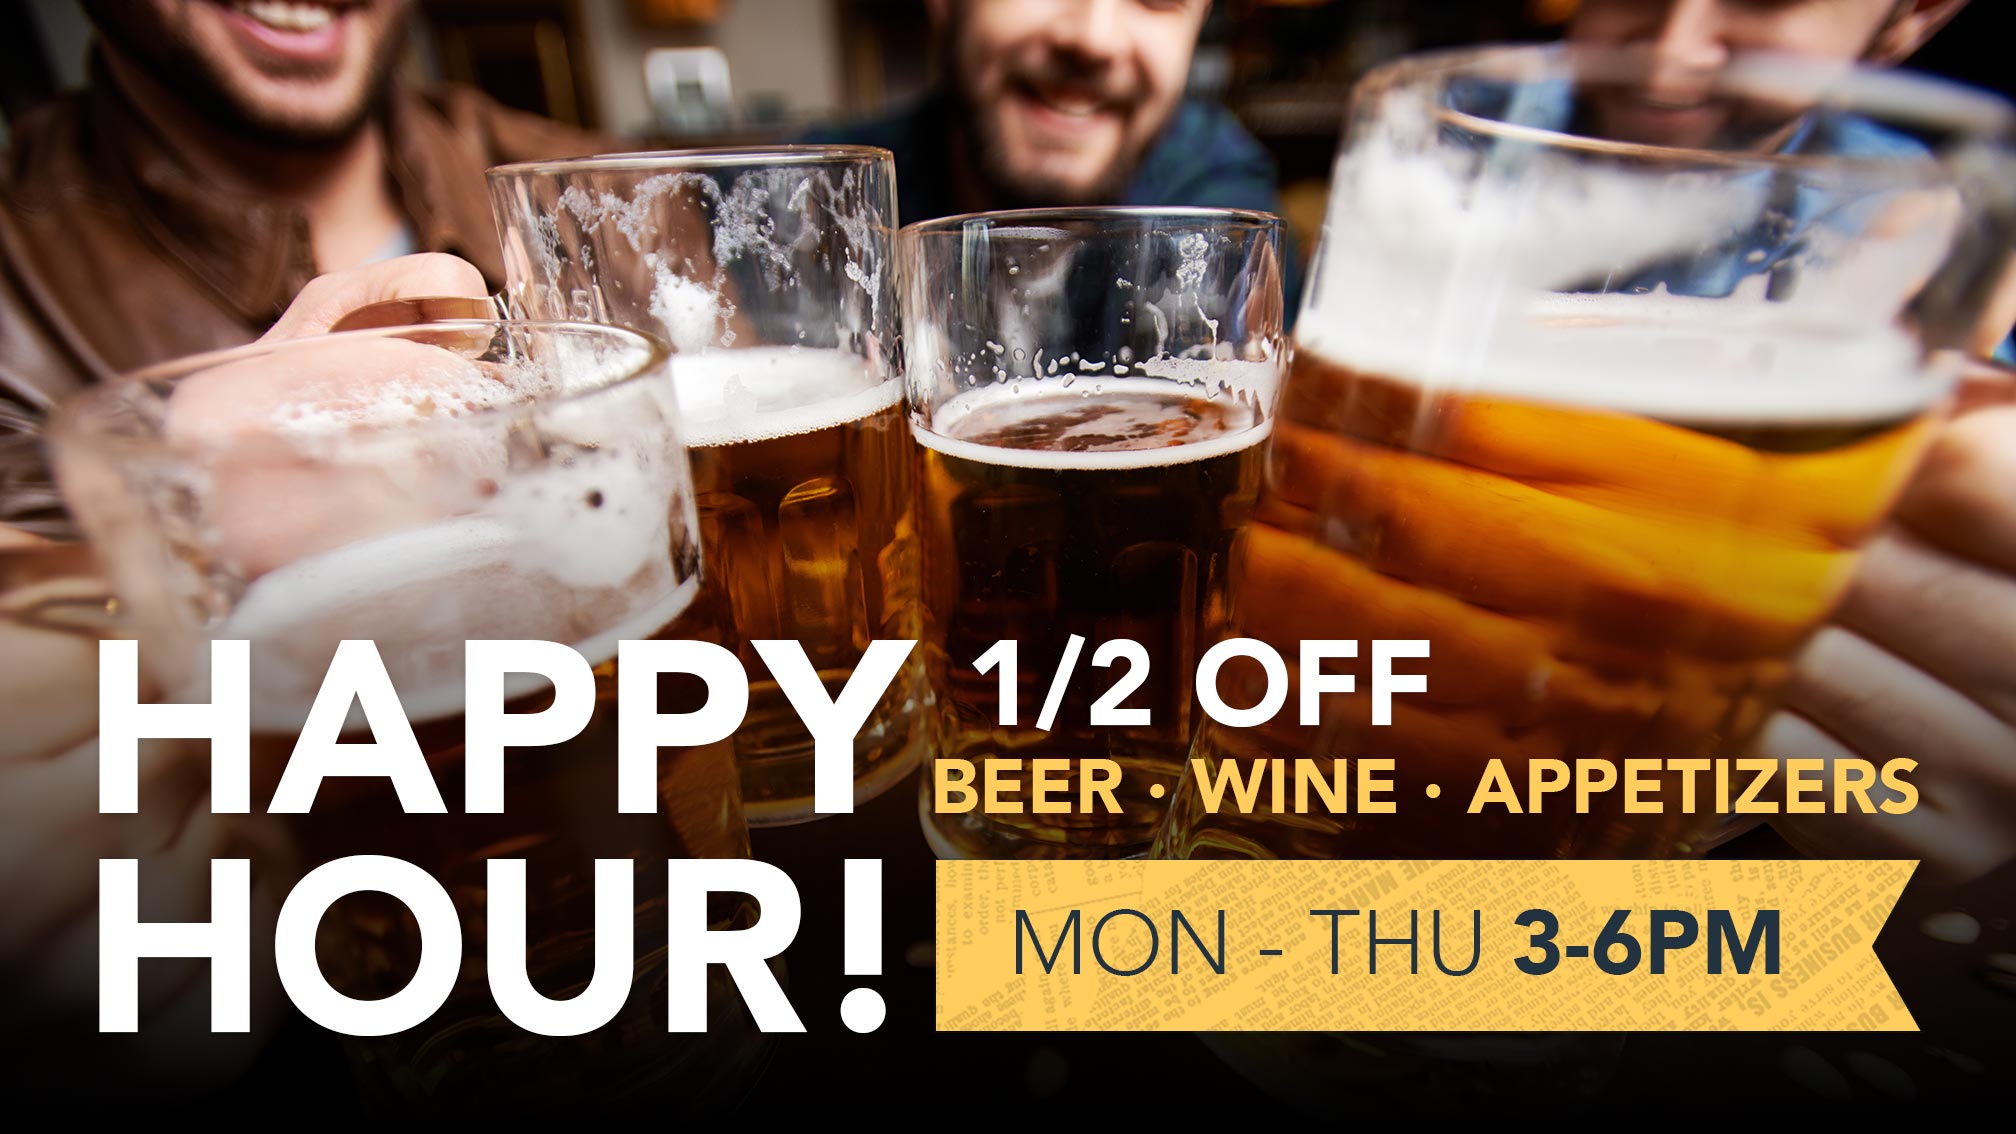 Happy Hour! 1/2 off beer, wine, appetizers - Monday through Thursday from 3-6pm